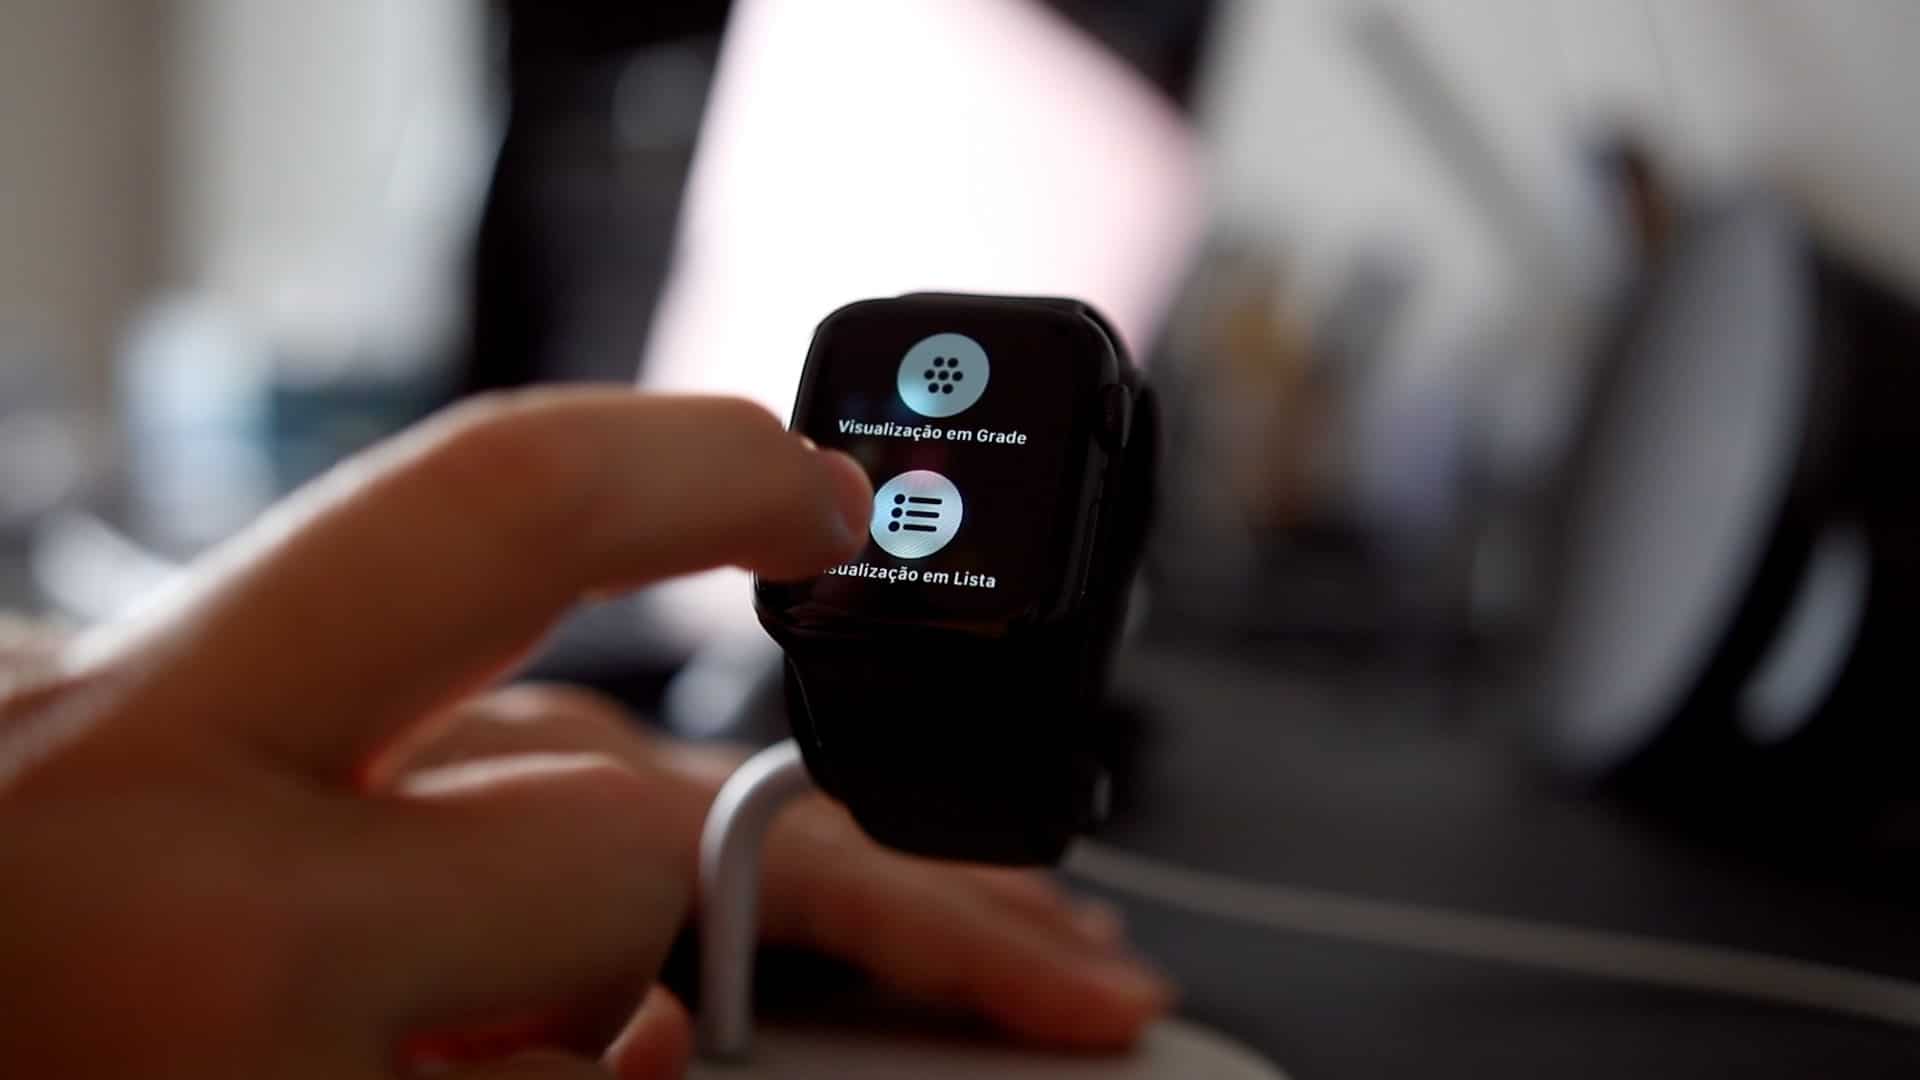 watchOS 7 will disable Force Touch on Apple Watches, indicating the end of technology